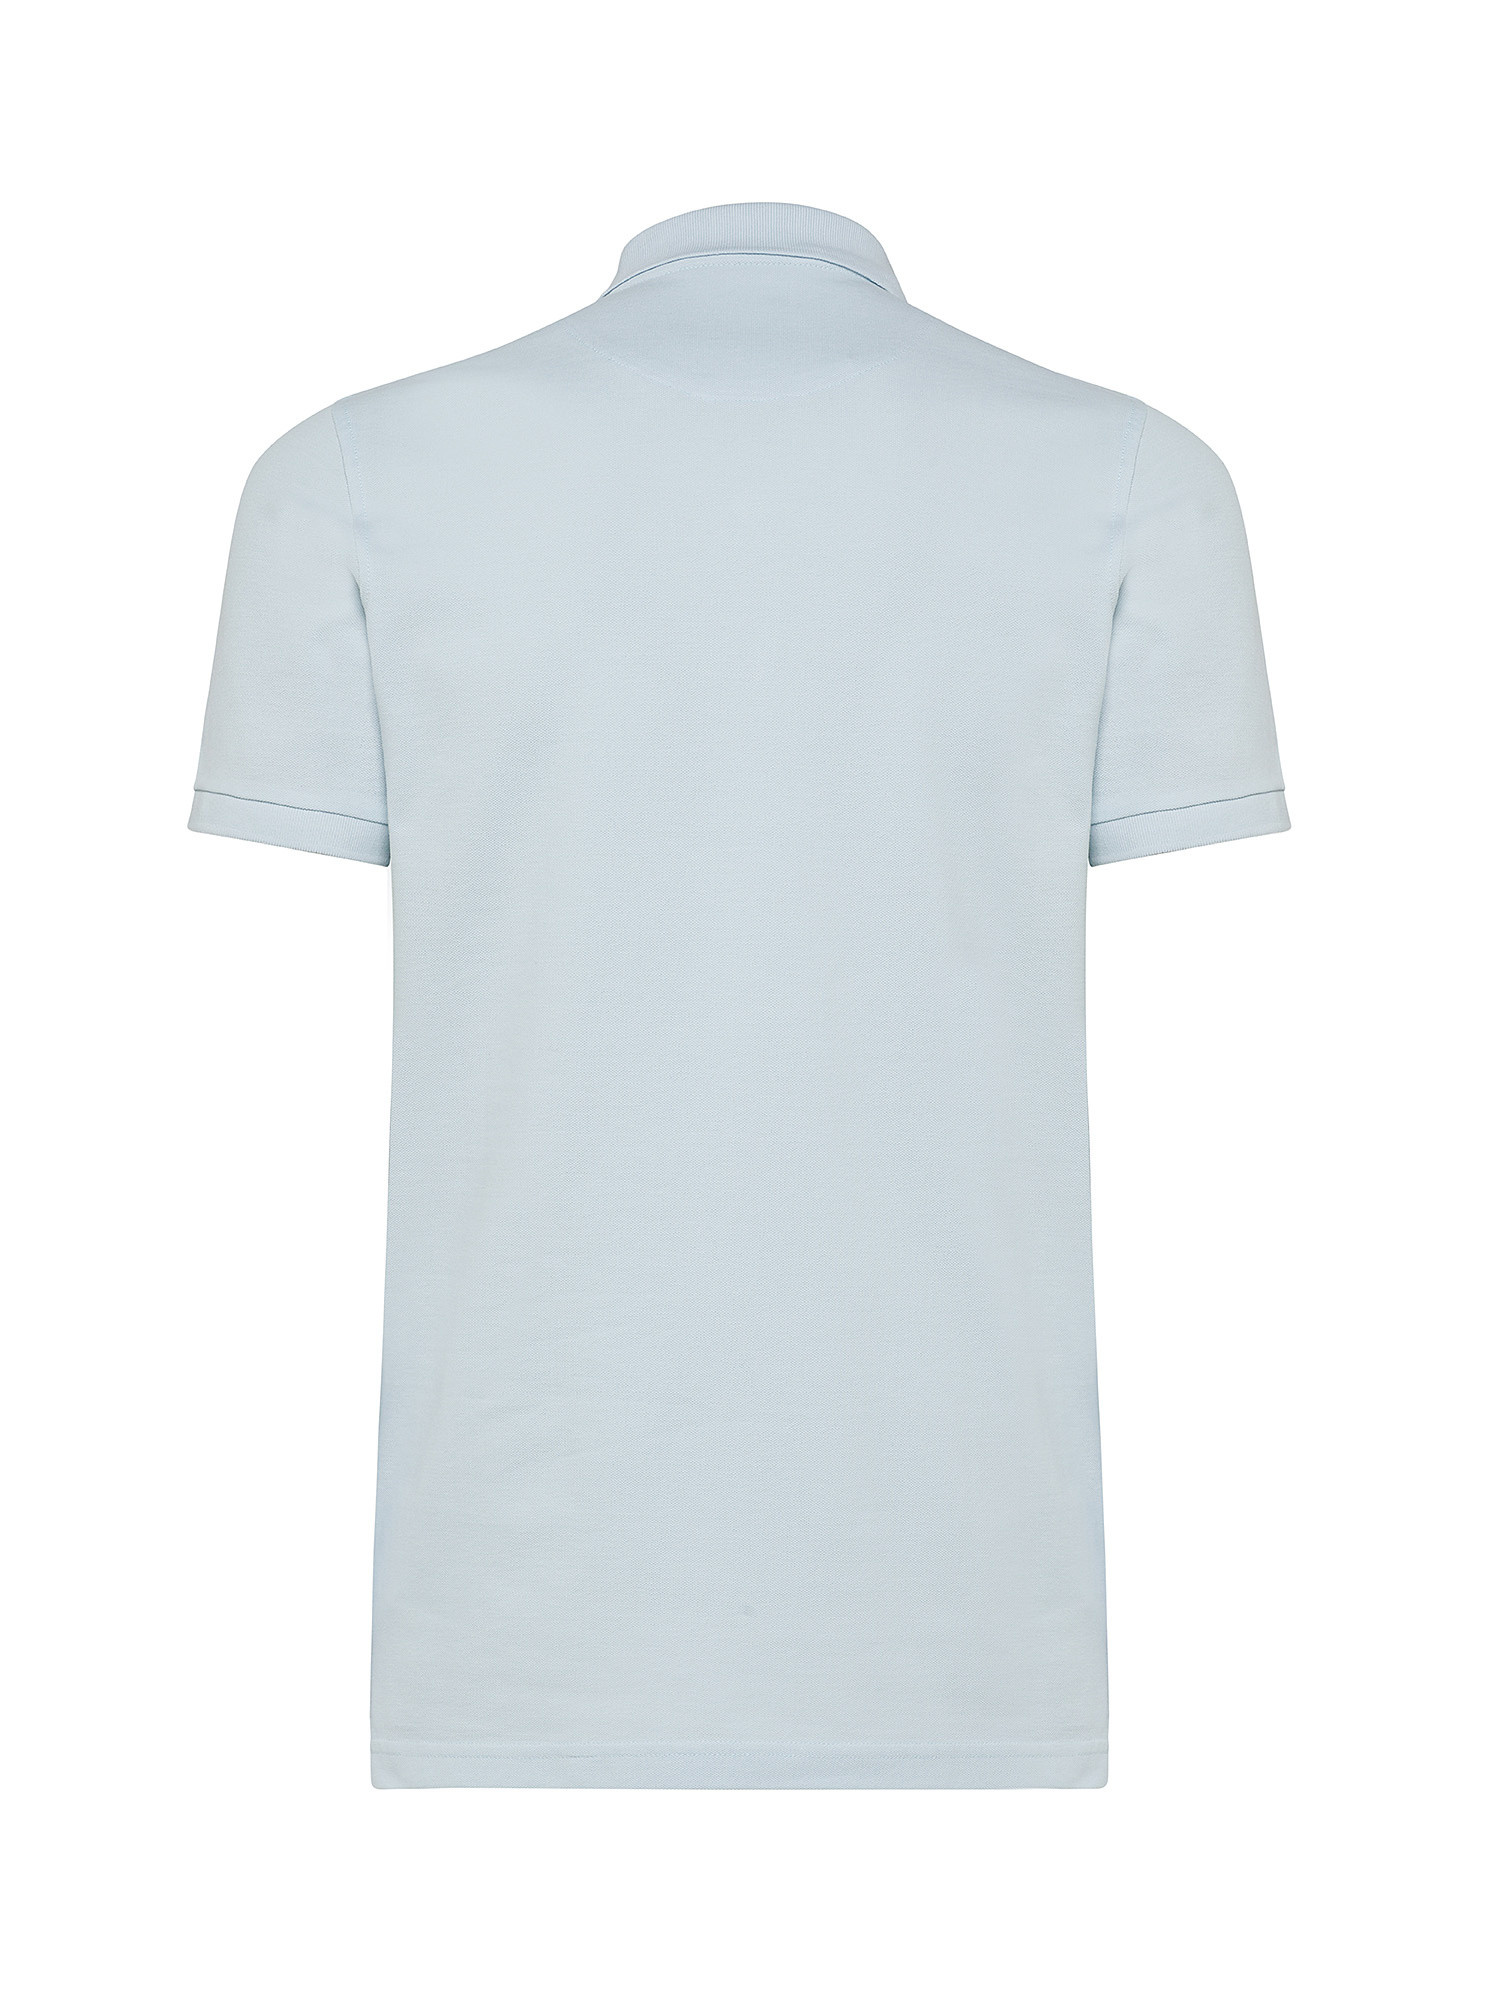 Manuel Ritz - Polo with contrasting embroidered logo, Light Blue, large image number 1